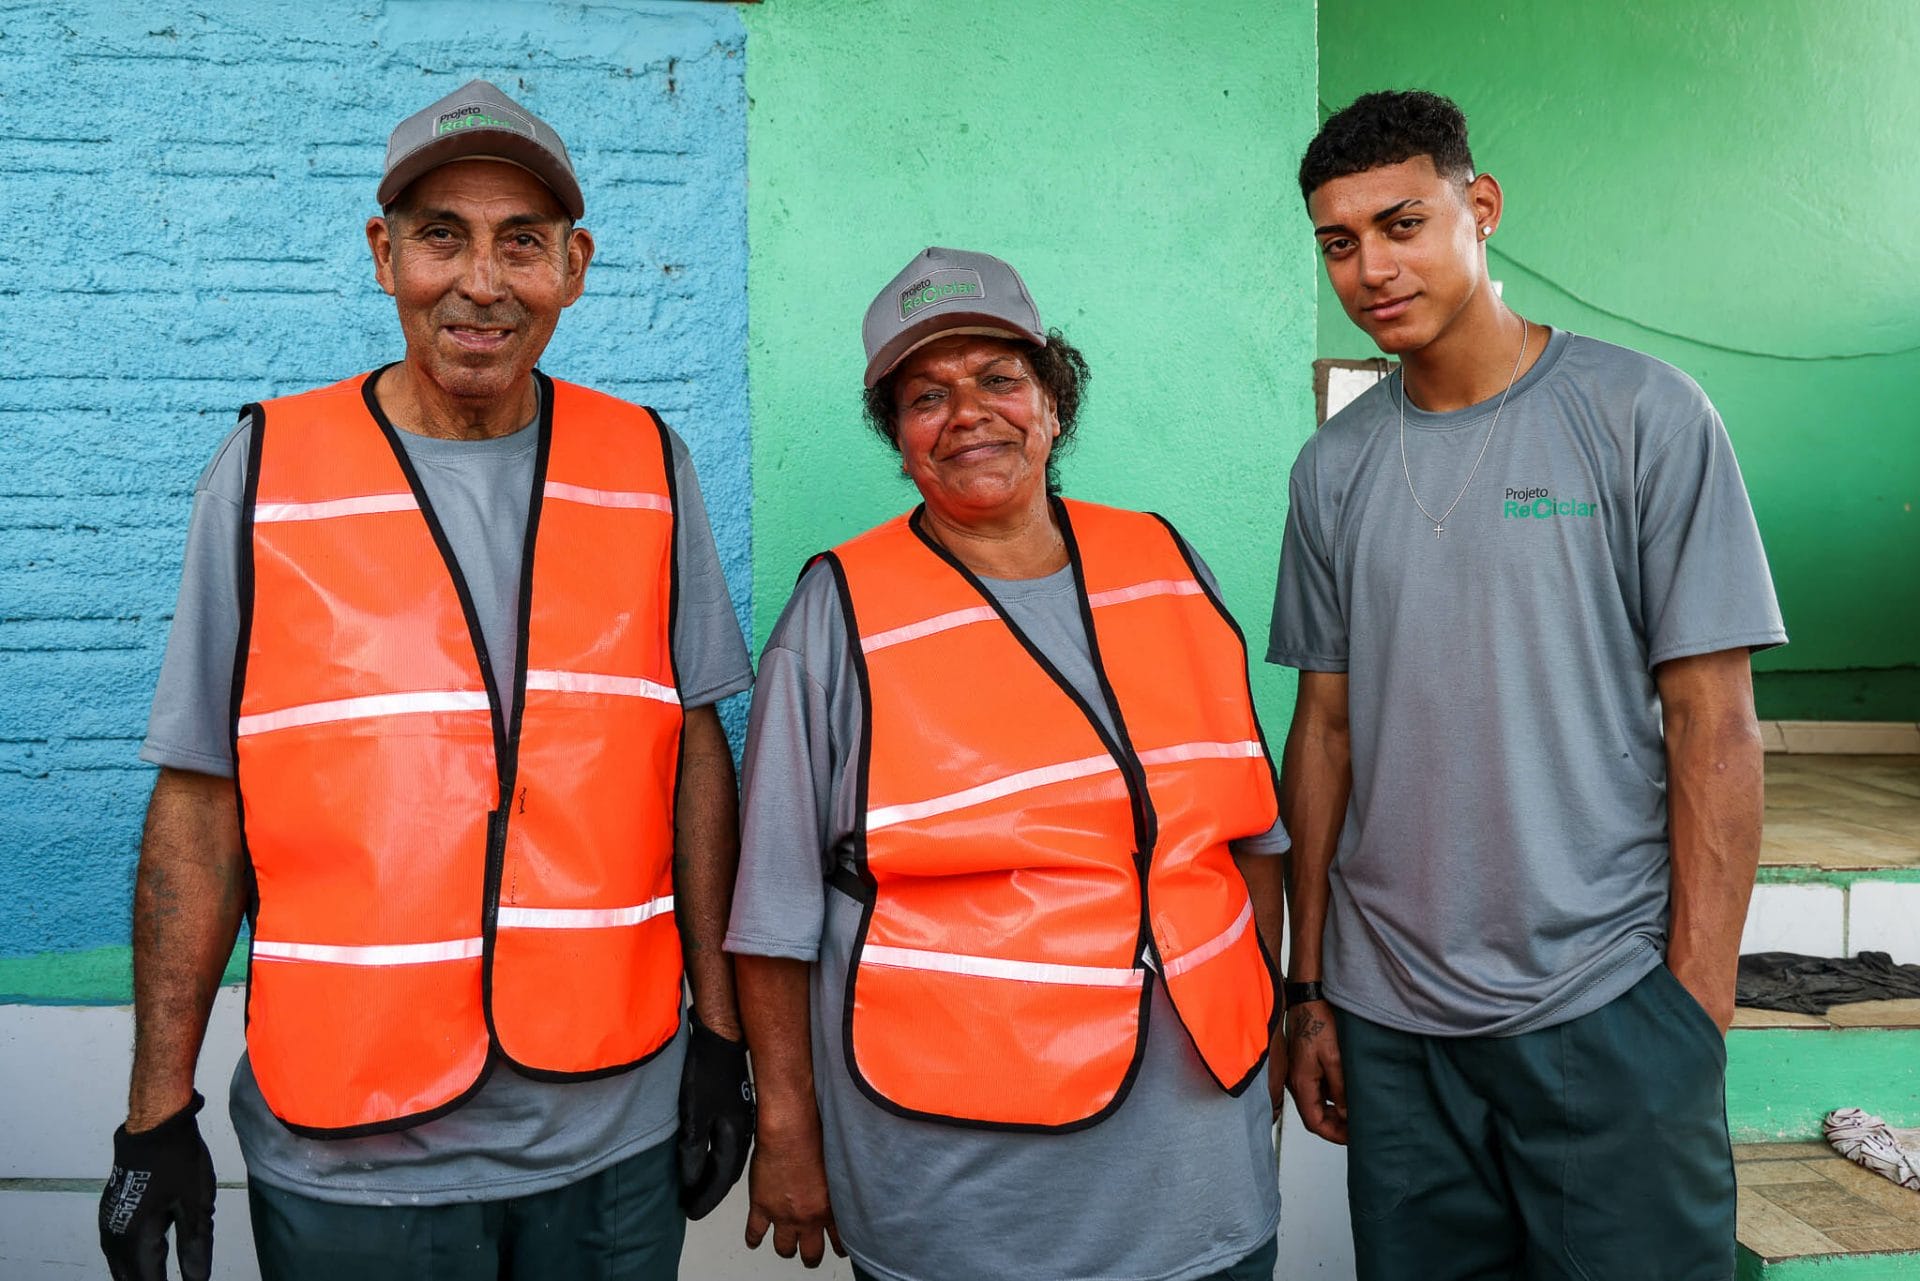 Global Communities, in partnership with community leaders and local partners such as John Deere, SINAI, SENAC, Tanac, Biocitrus Poker, Sicredi, and the local municipality trains Brazil's catadores (recyclers) through the Projecto Reciclar program.